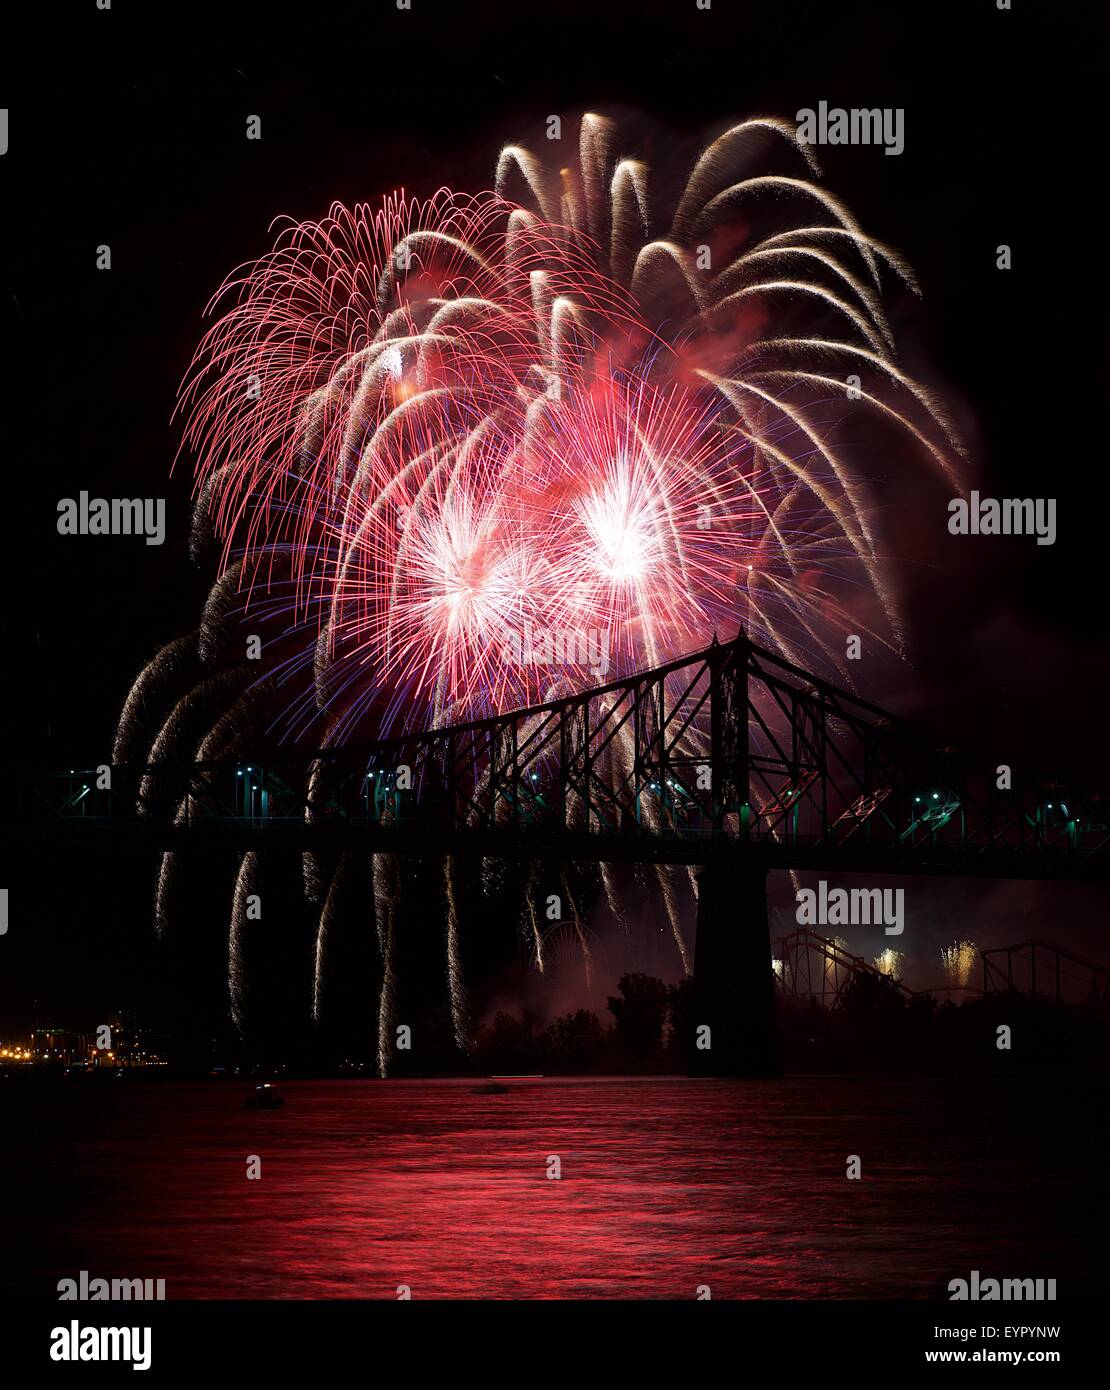 Red fireworks explode in Montreal with bridge silhoutte in dark sky,Montreal fireworks festival, fireworks explode, New Year, fi Stock Photo